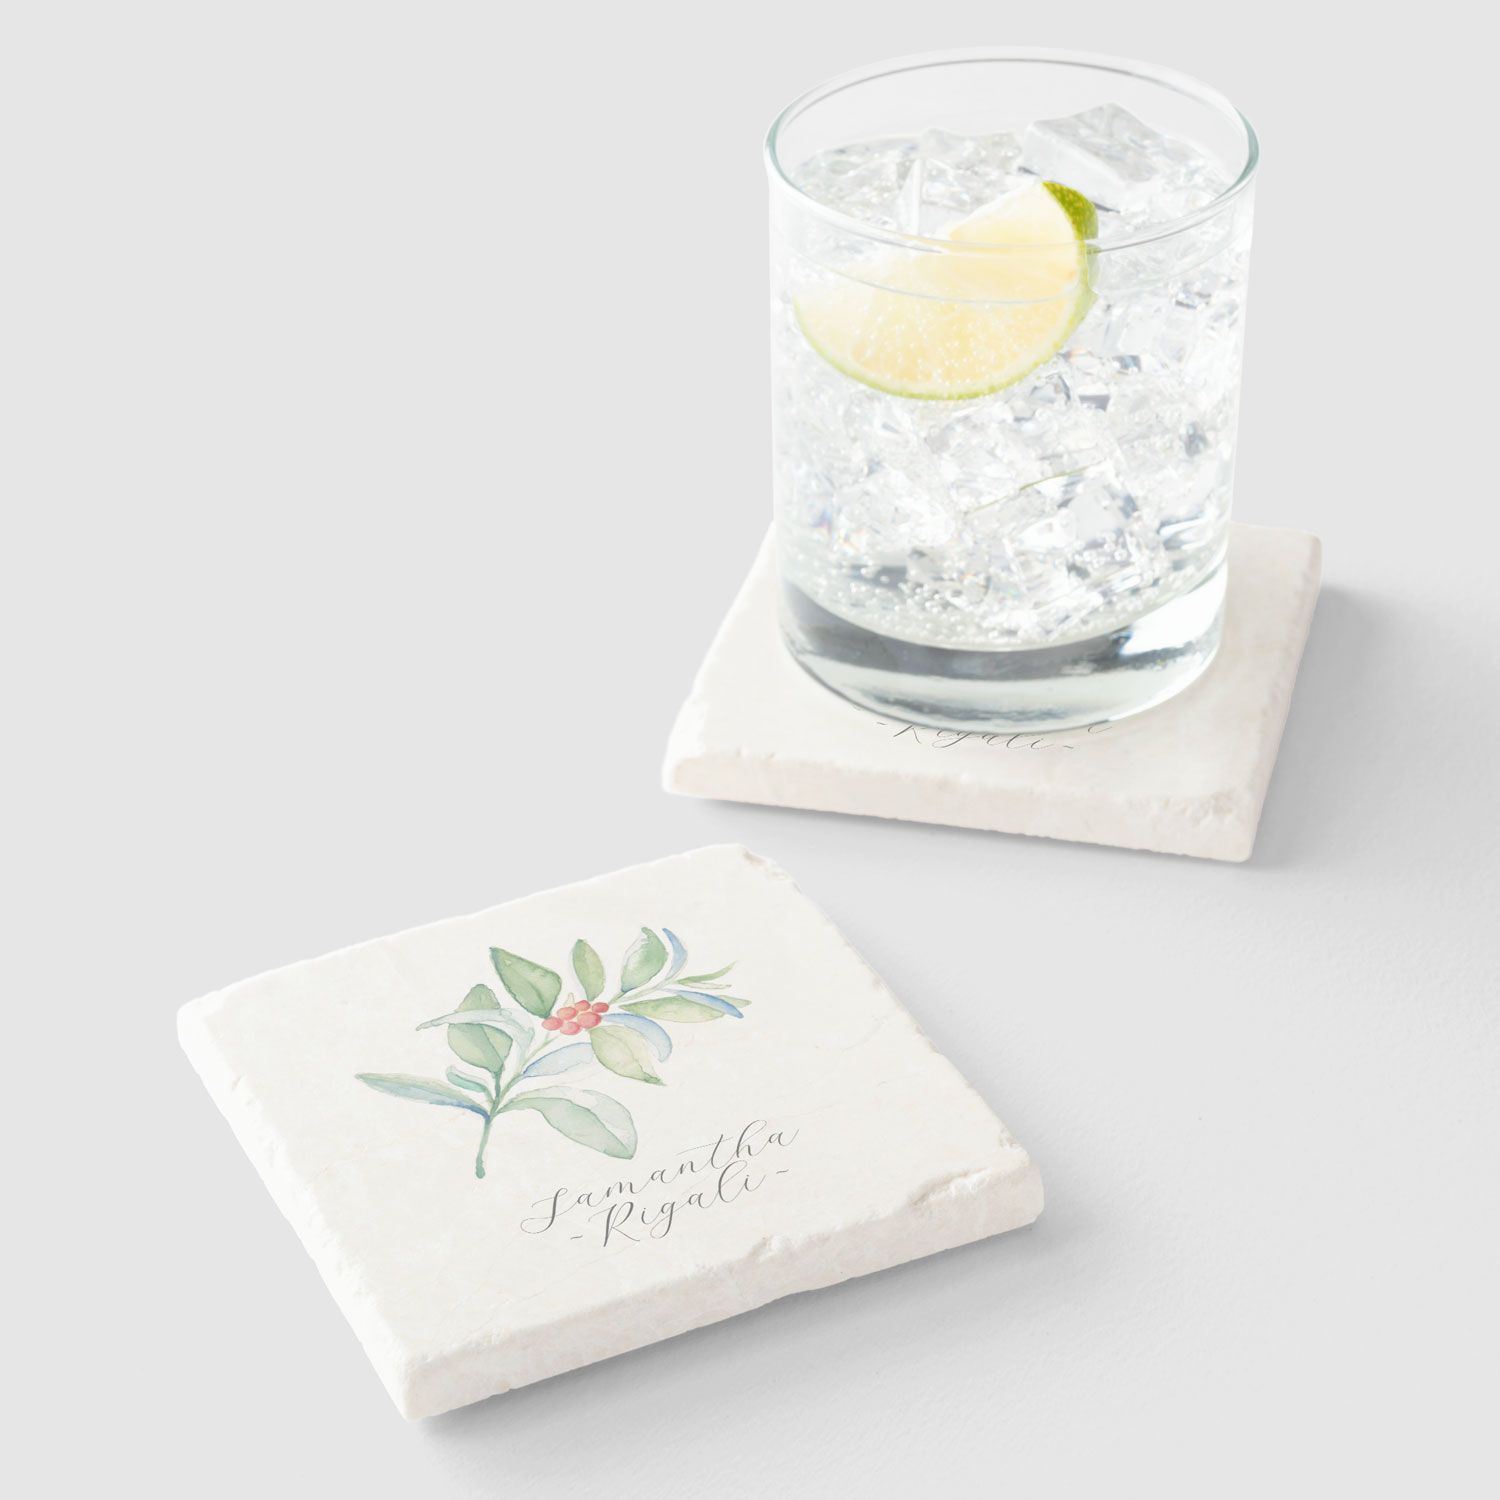 Give them bridal shower favors that they will love and used. Personalized stone coasters. Click to shop this design.